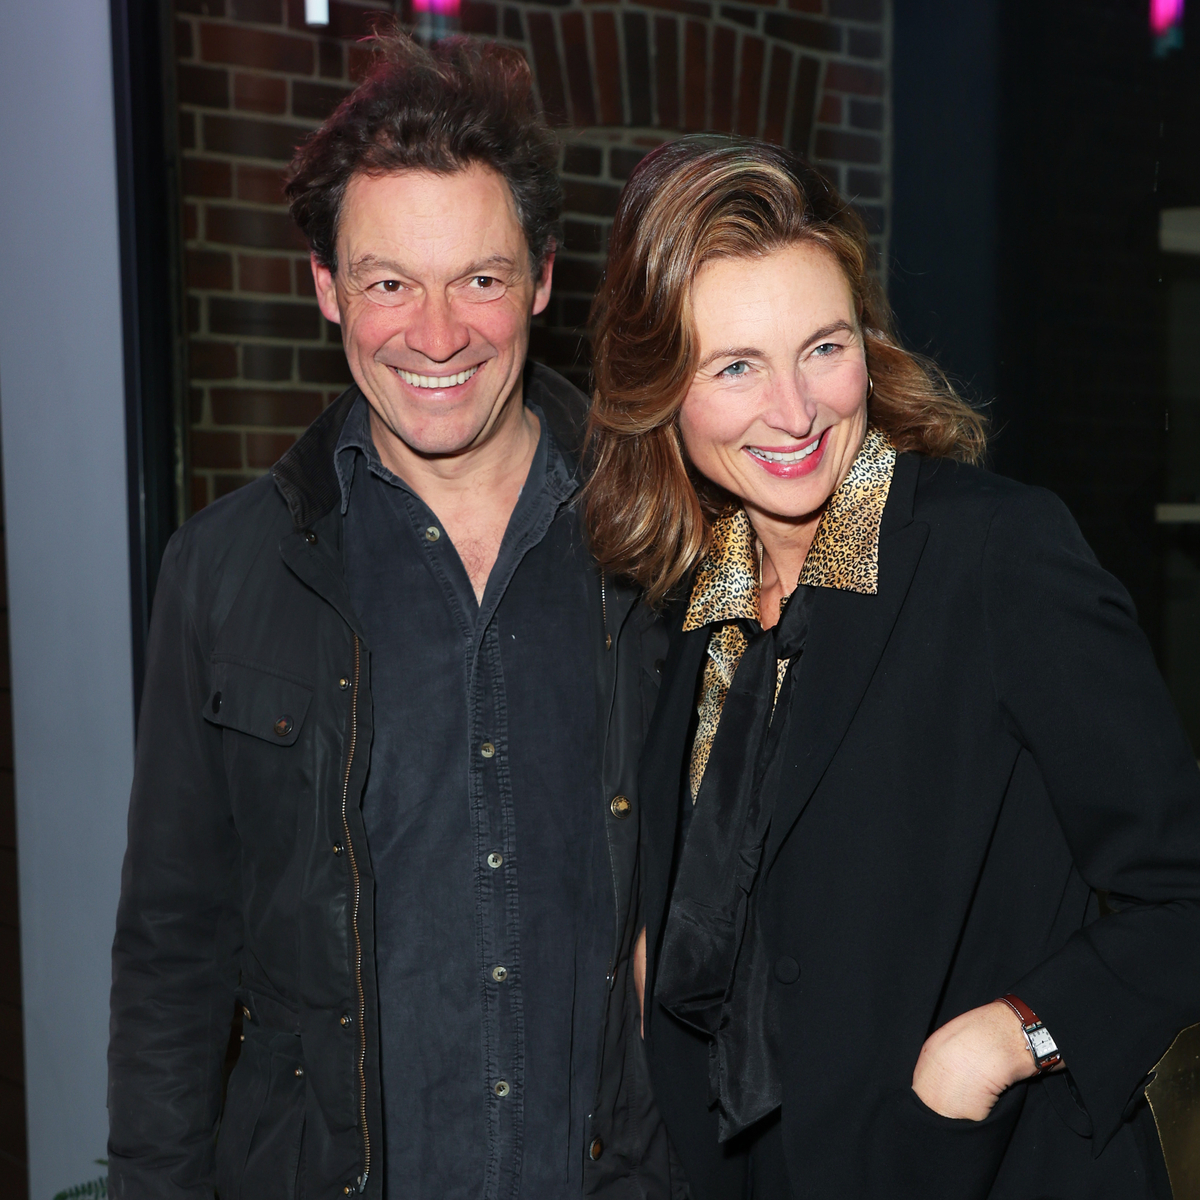 The Many Colorful Things Dominic West Has Said About Cheating and Extramarital Affairs